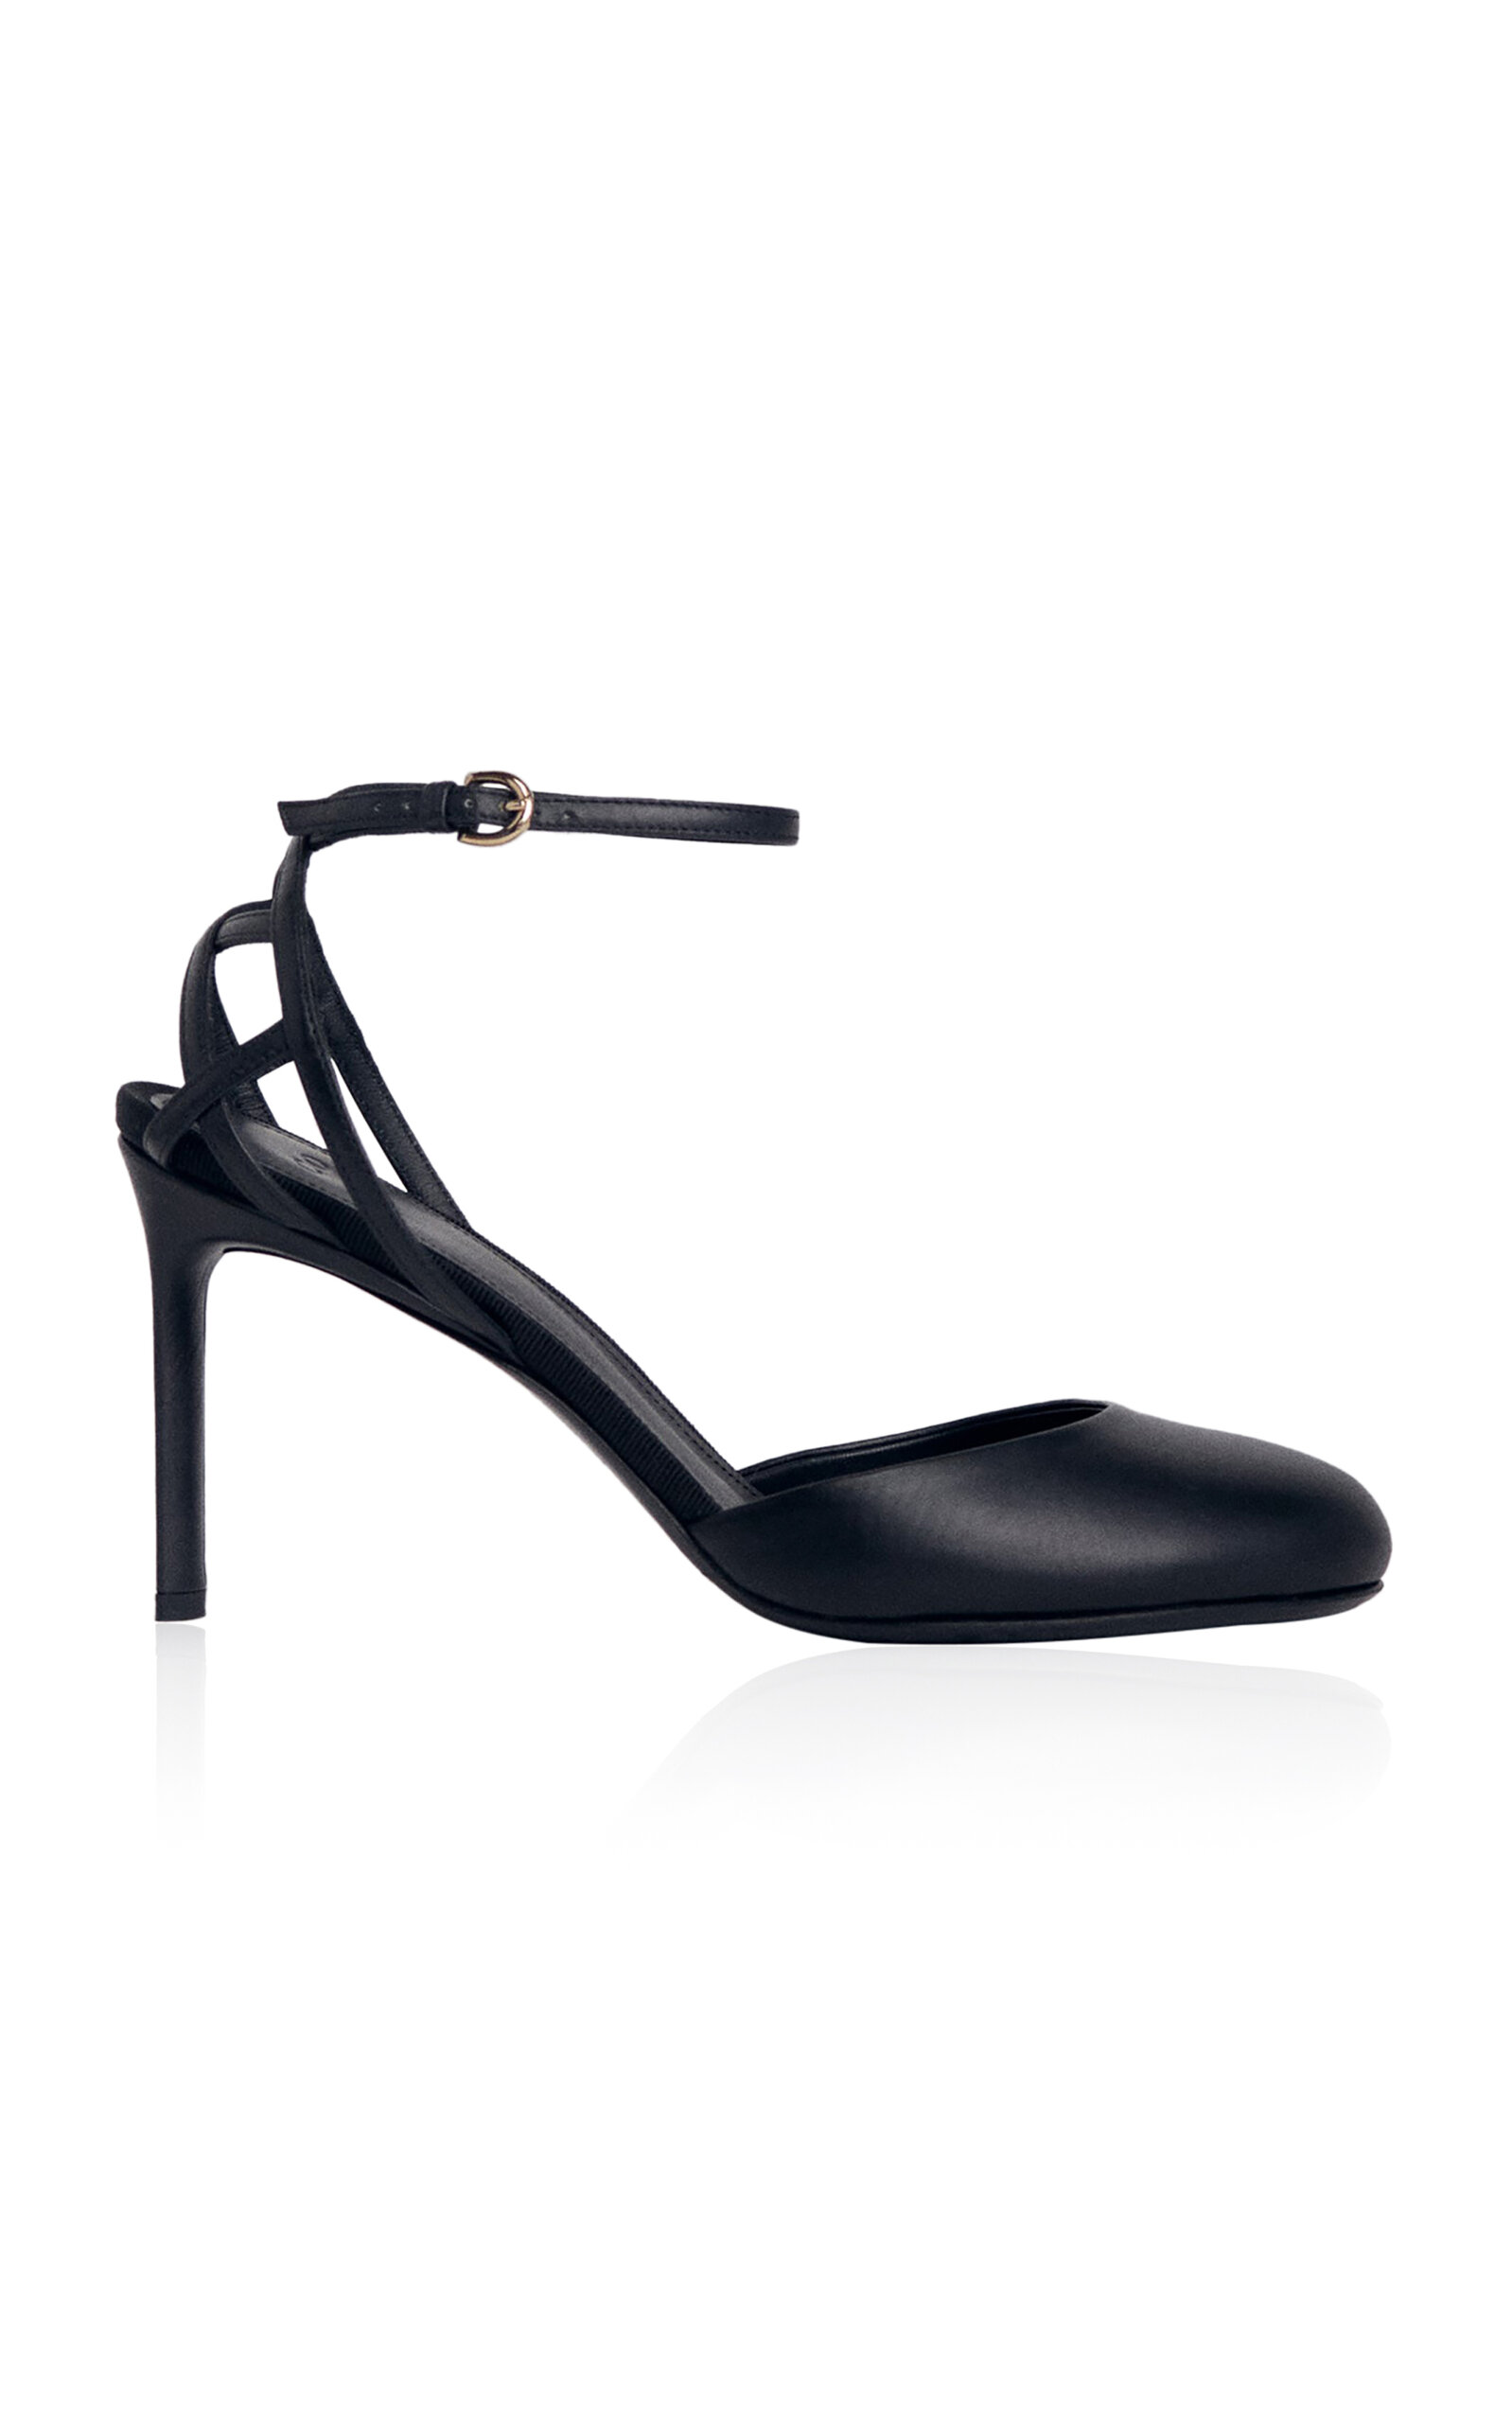 Co D'orsay Leather Pumps In Black